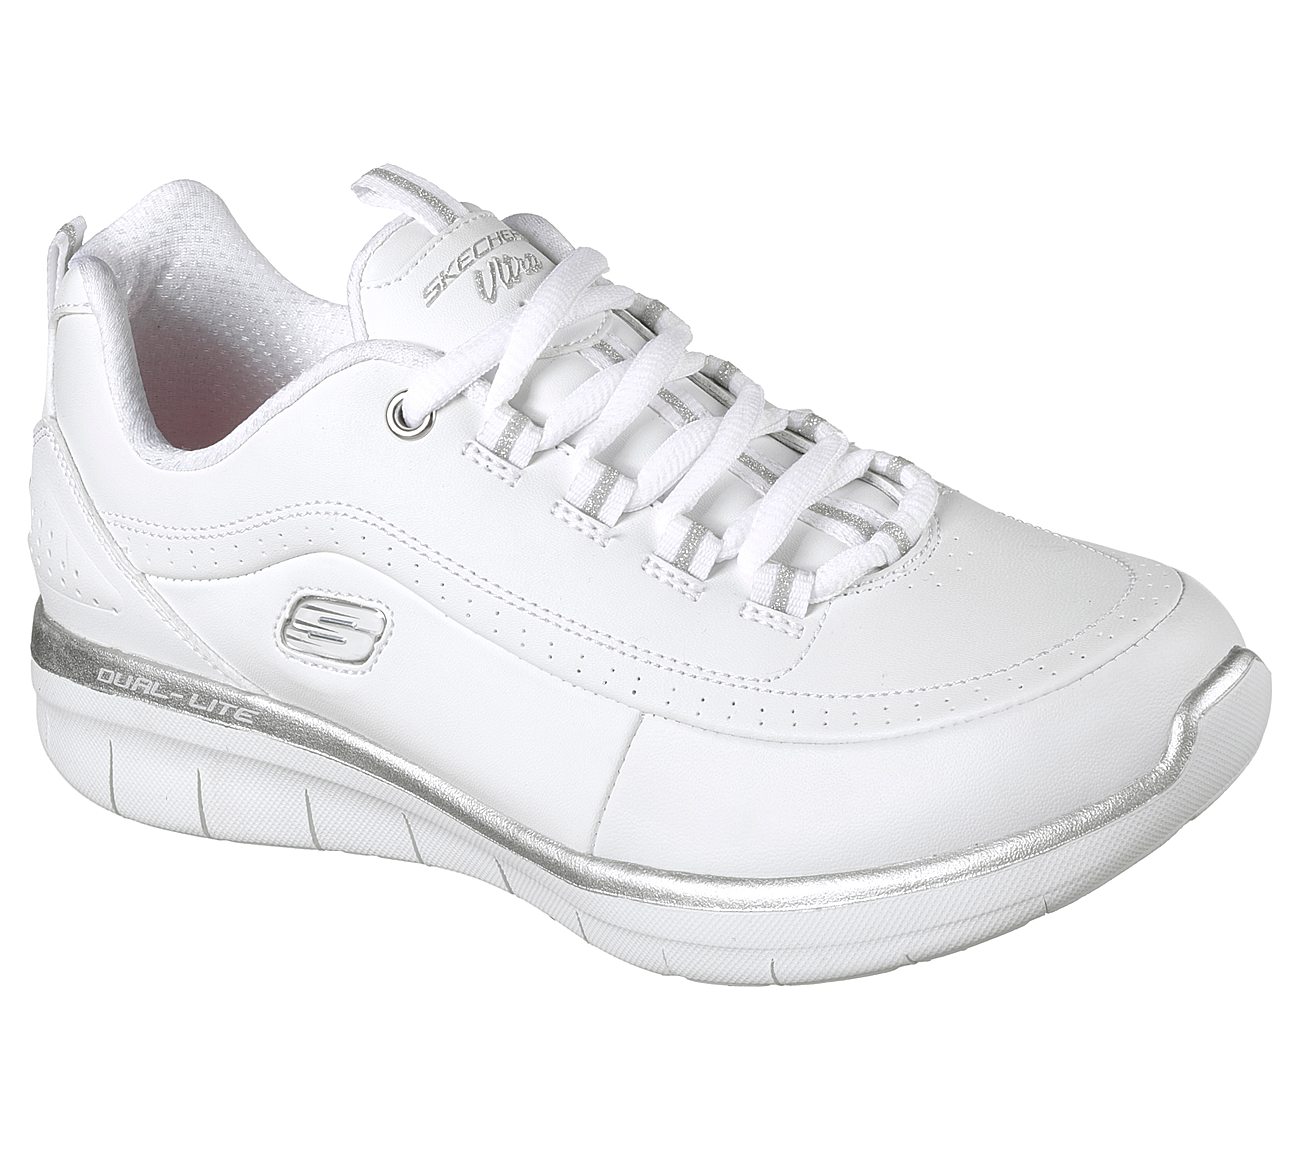 SKECHERS SYNERGY 2.0 - MEMORY FOAM AIR COOLED - Latini Sport